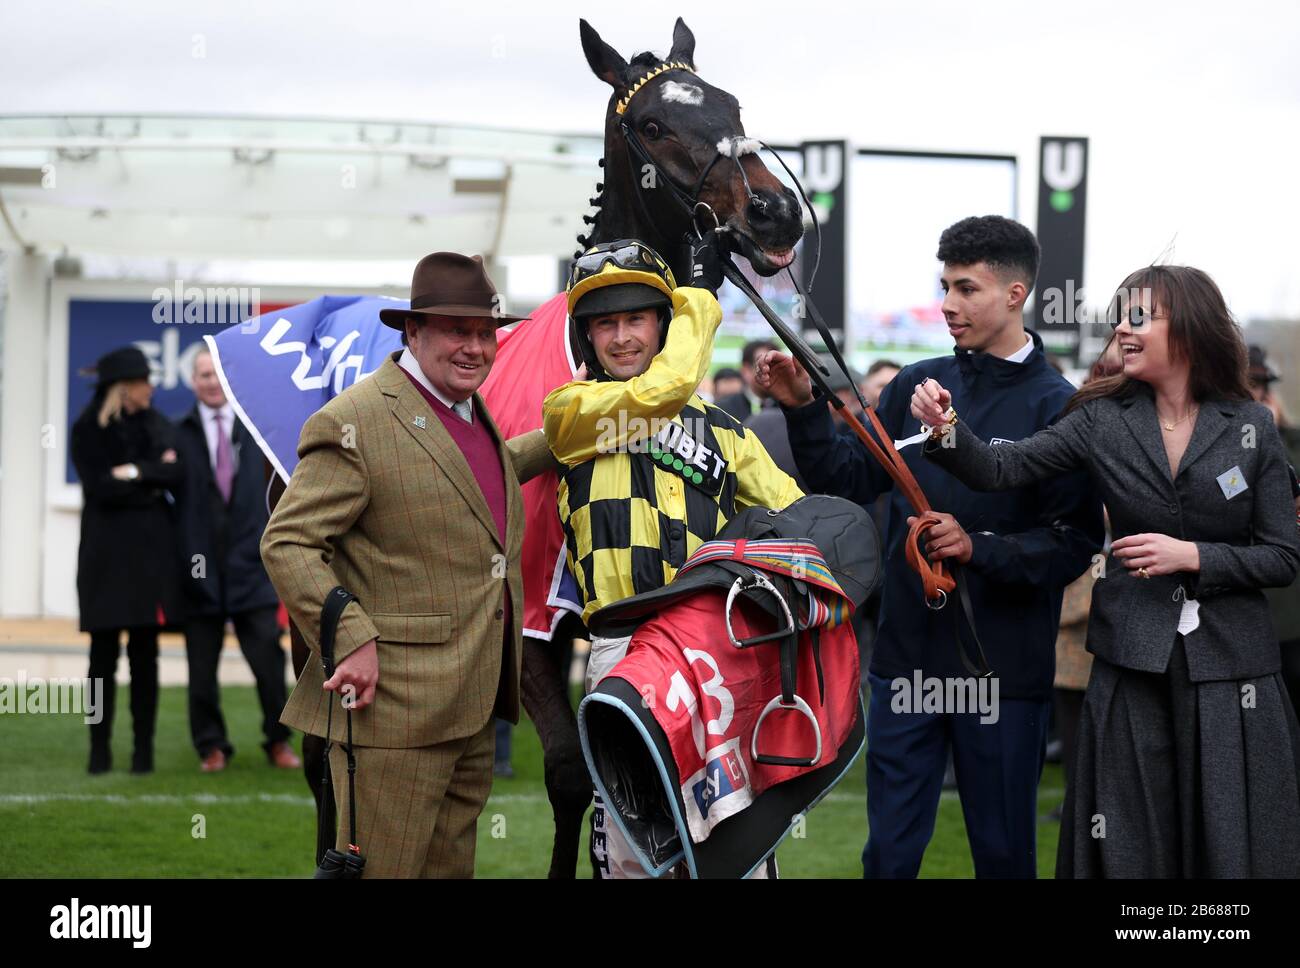 Nico de Boinville and trainer Nicky Henderson celebrate following victory in the the Sky Bet Supreme Novices' Hurdle aboard Shishkin on day one of the Cheltenham Festival at Cheltenham Racecourse, Cheltenham. Stock Photo